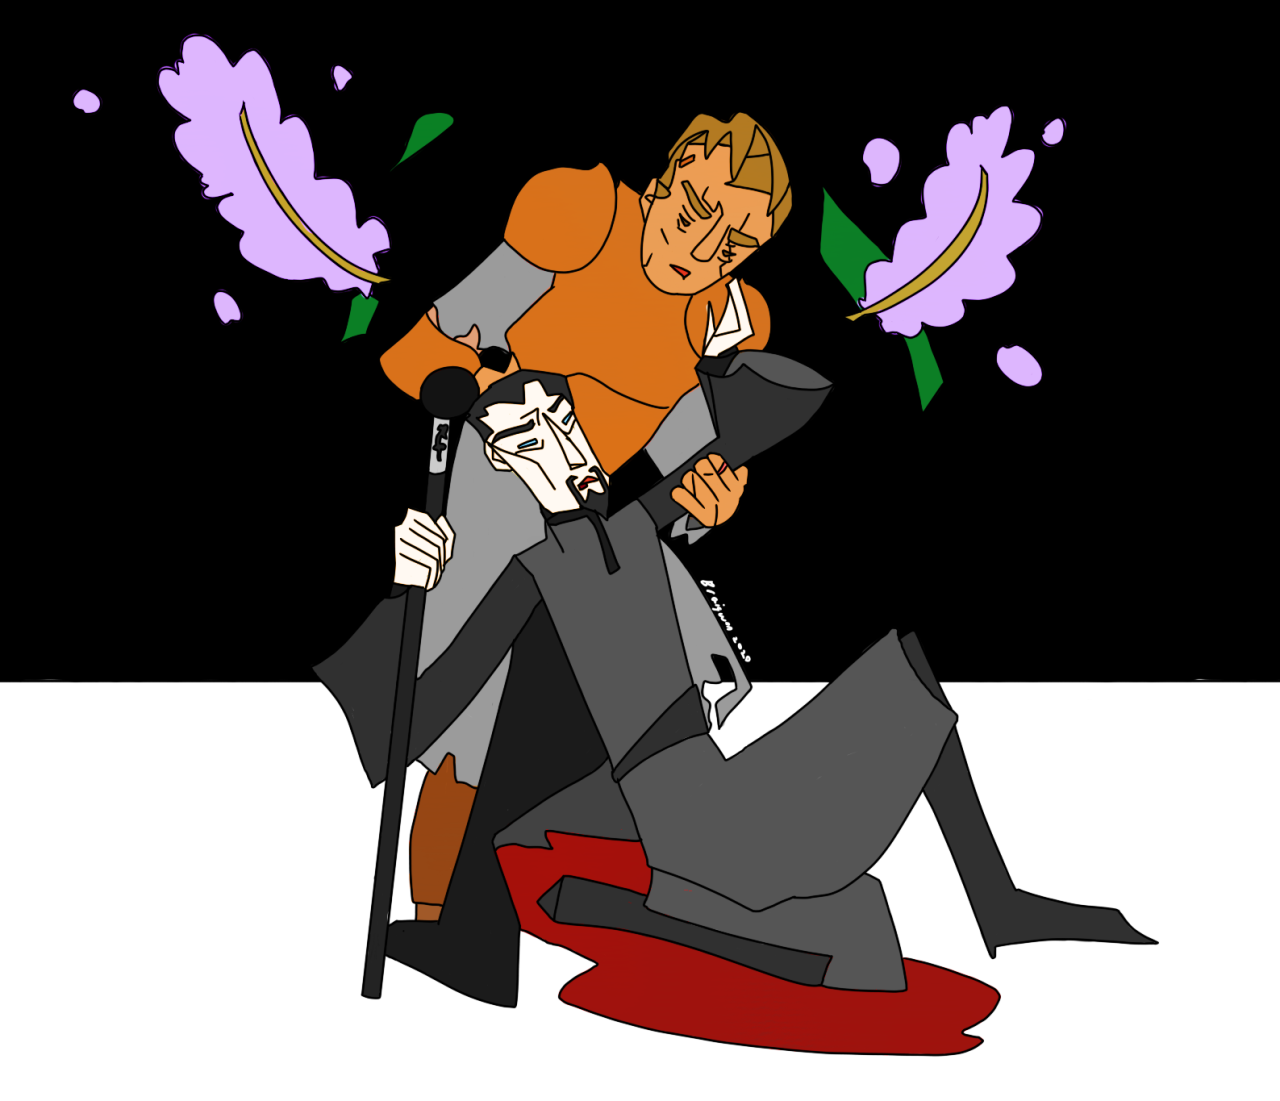 stylised drawing of vimes holding up vetinari, who is bleeding, in front of lilacs